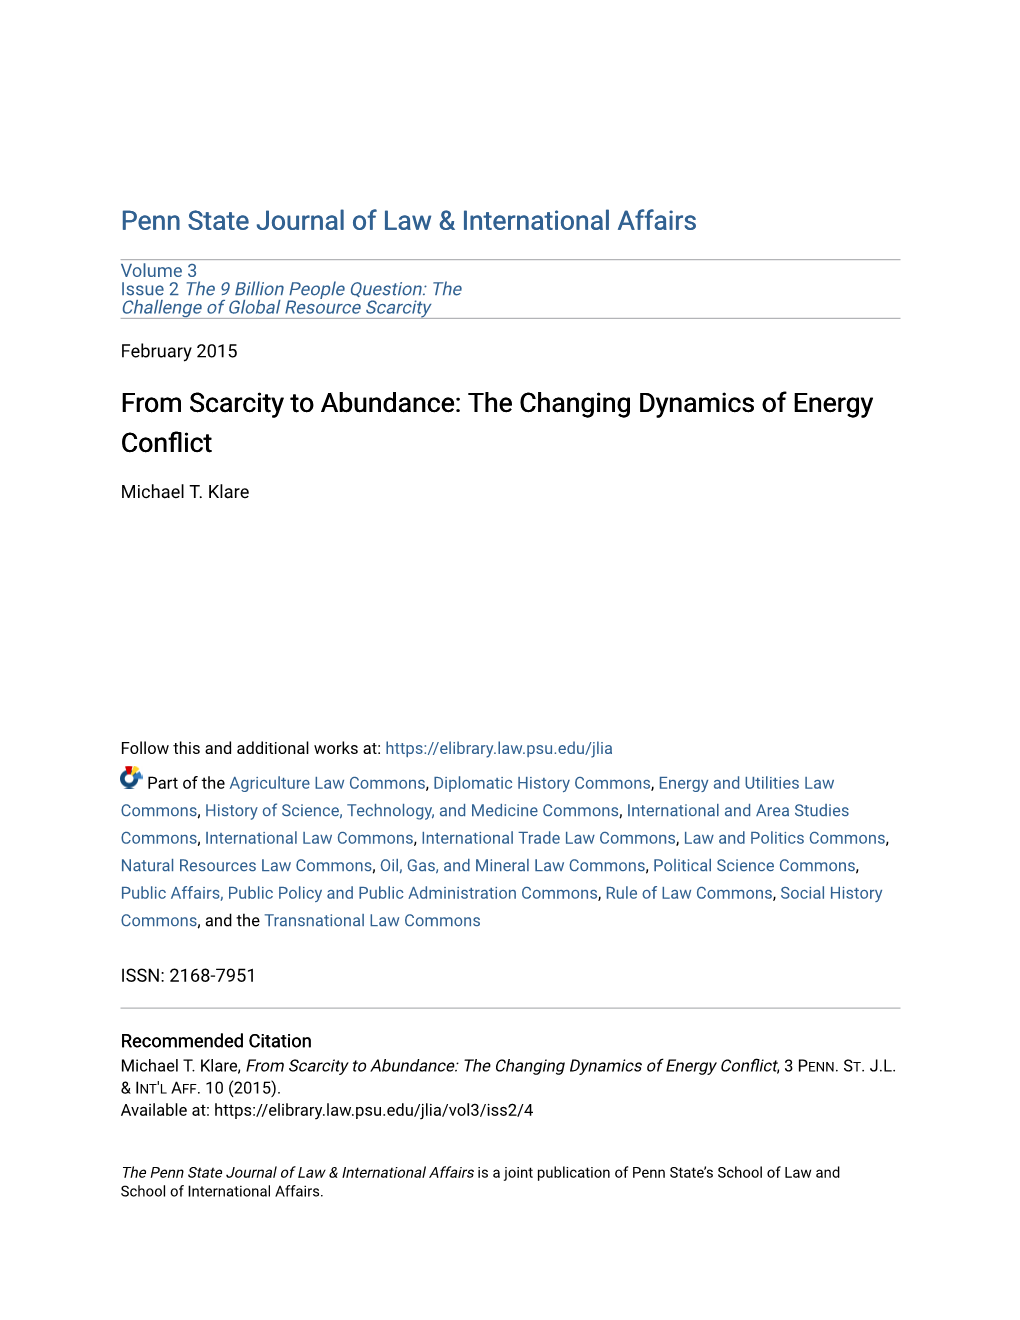 The Changing Dynamics of Energy Conflict